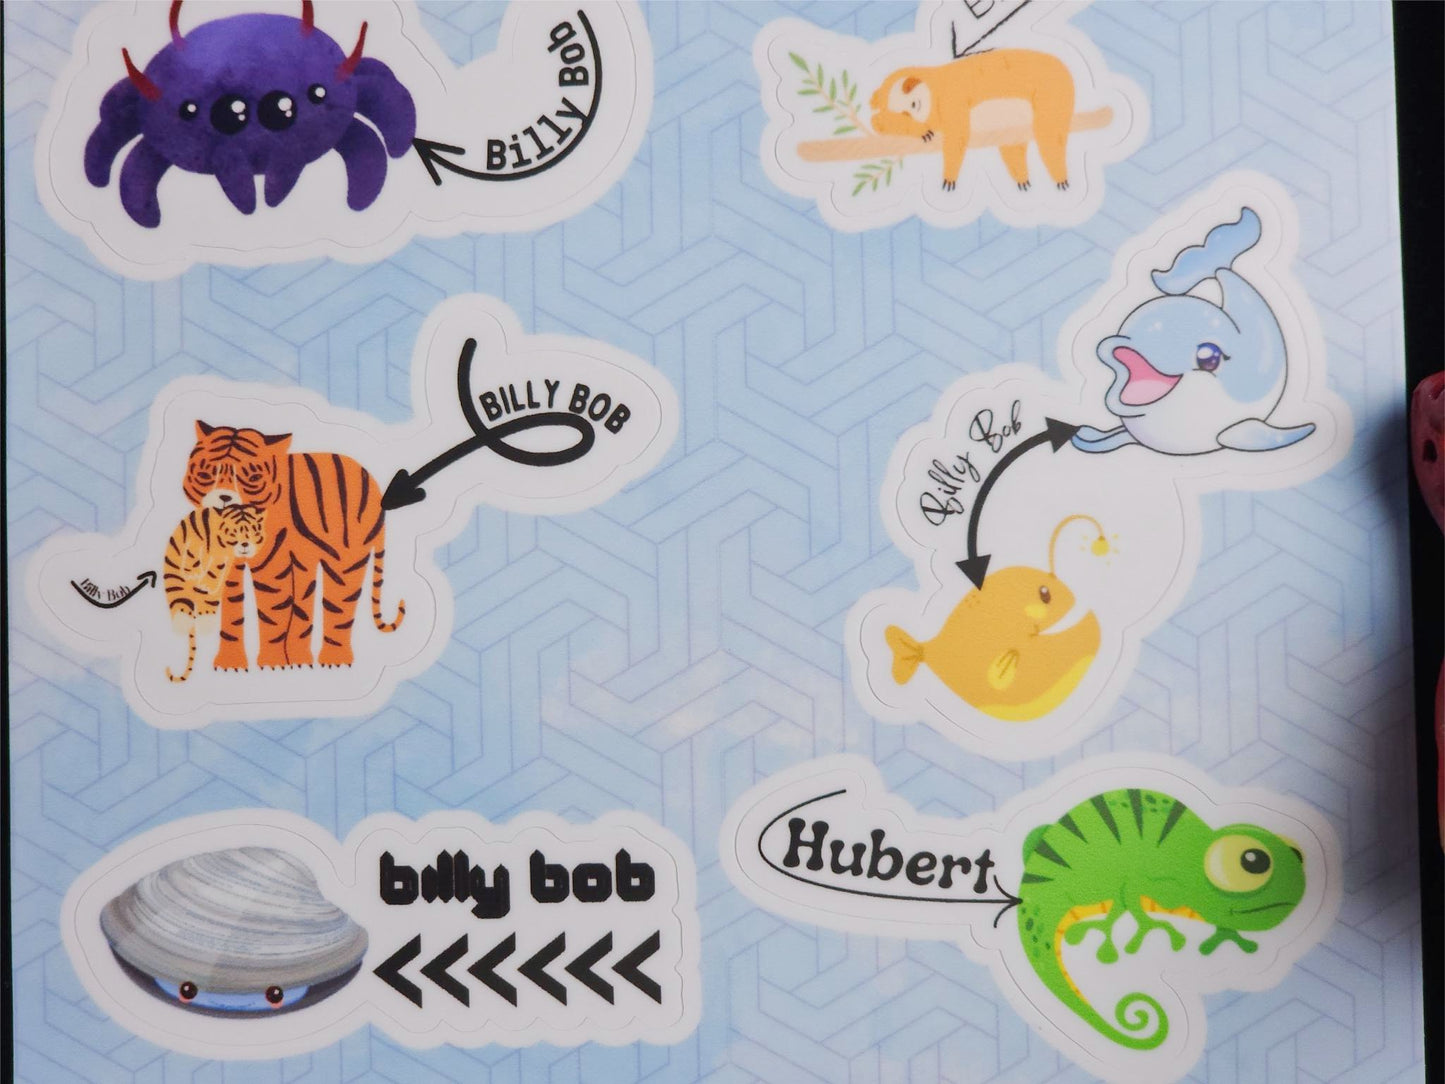 History Plus Stickers! Billy bob pack #2